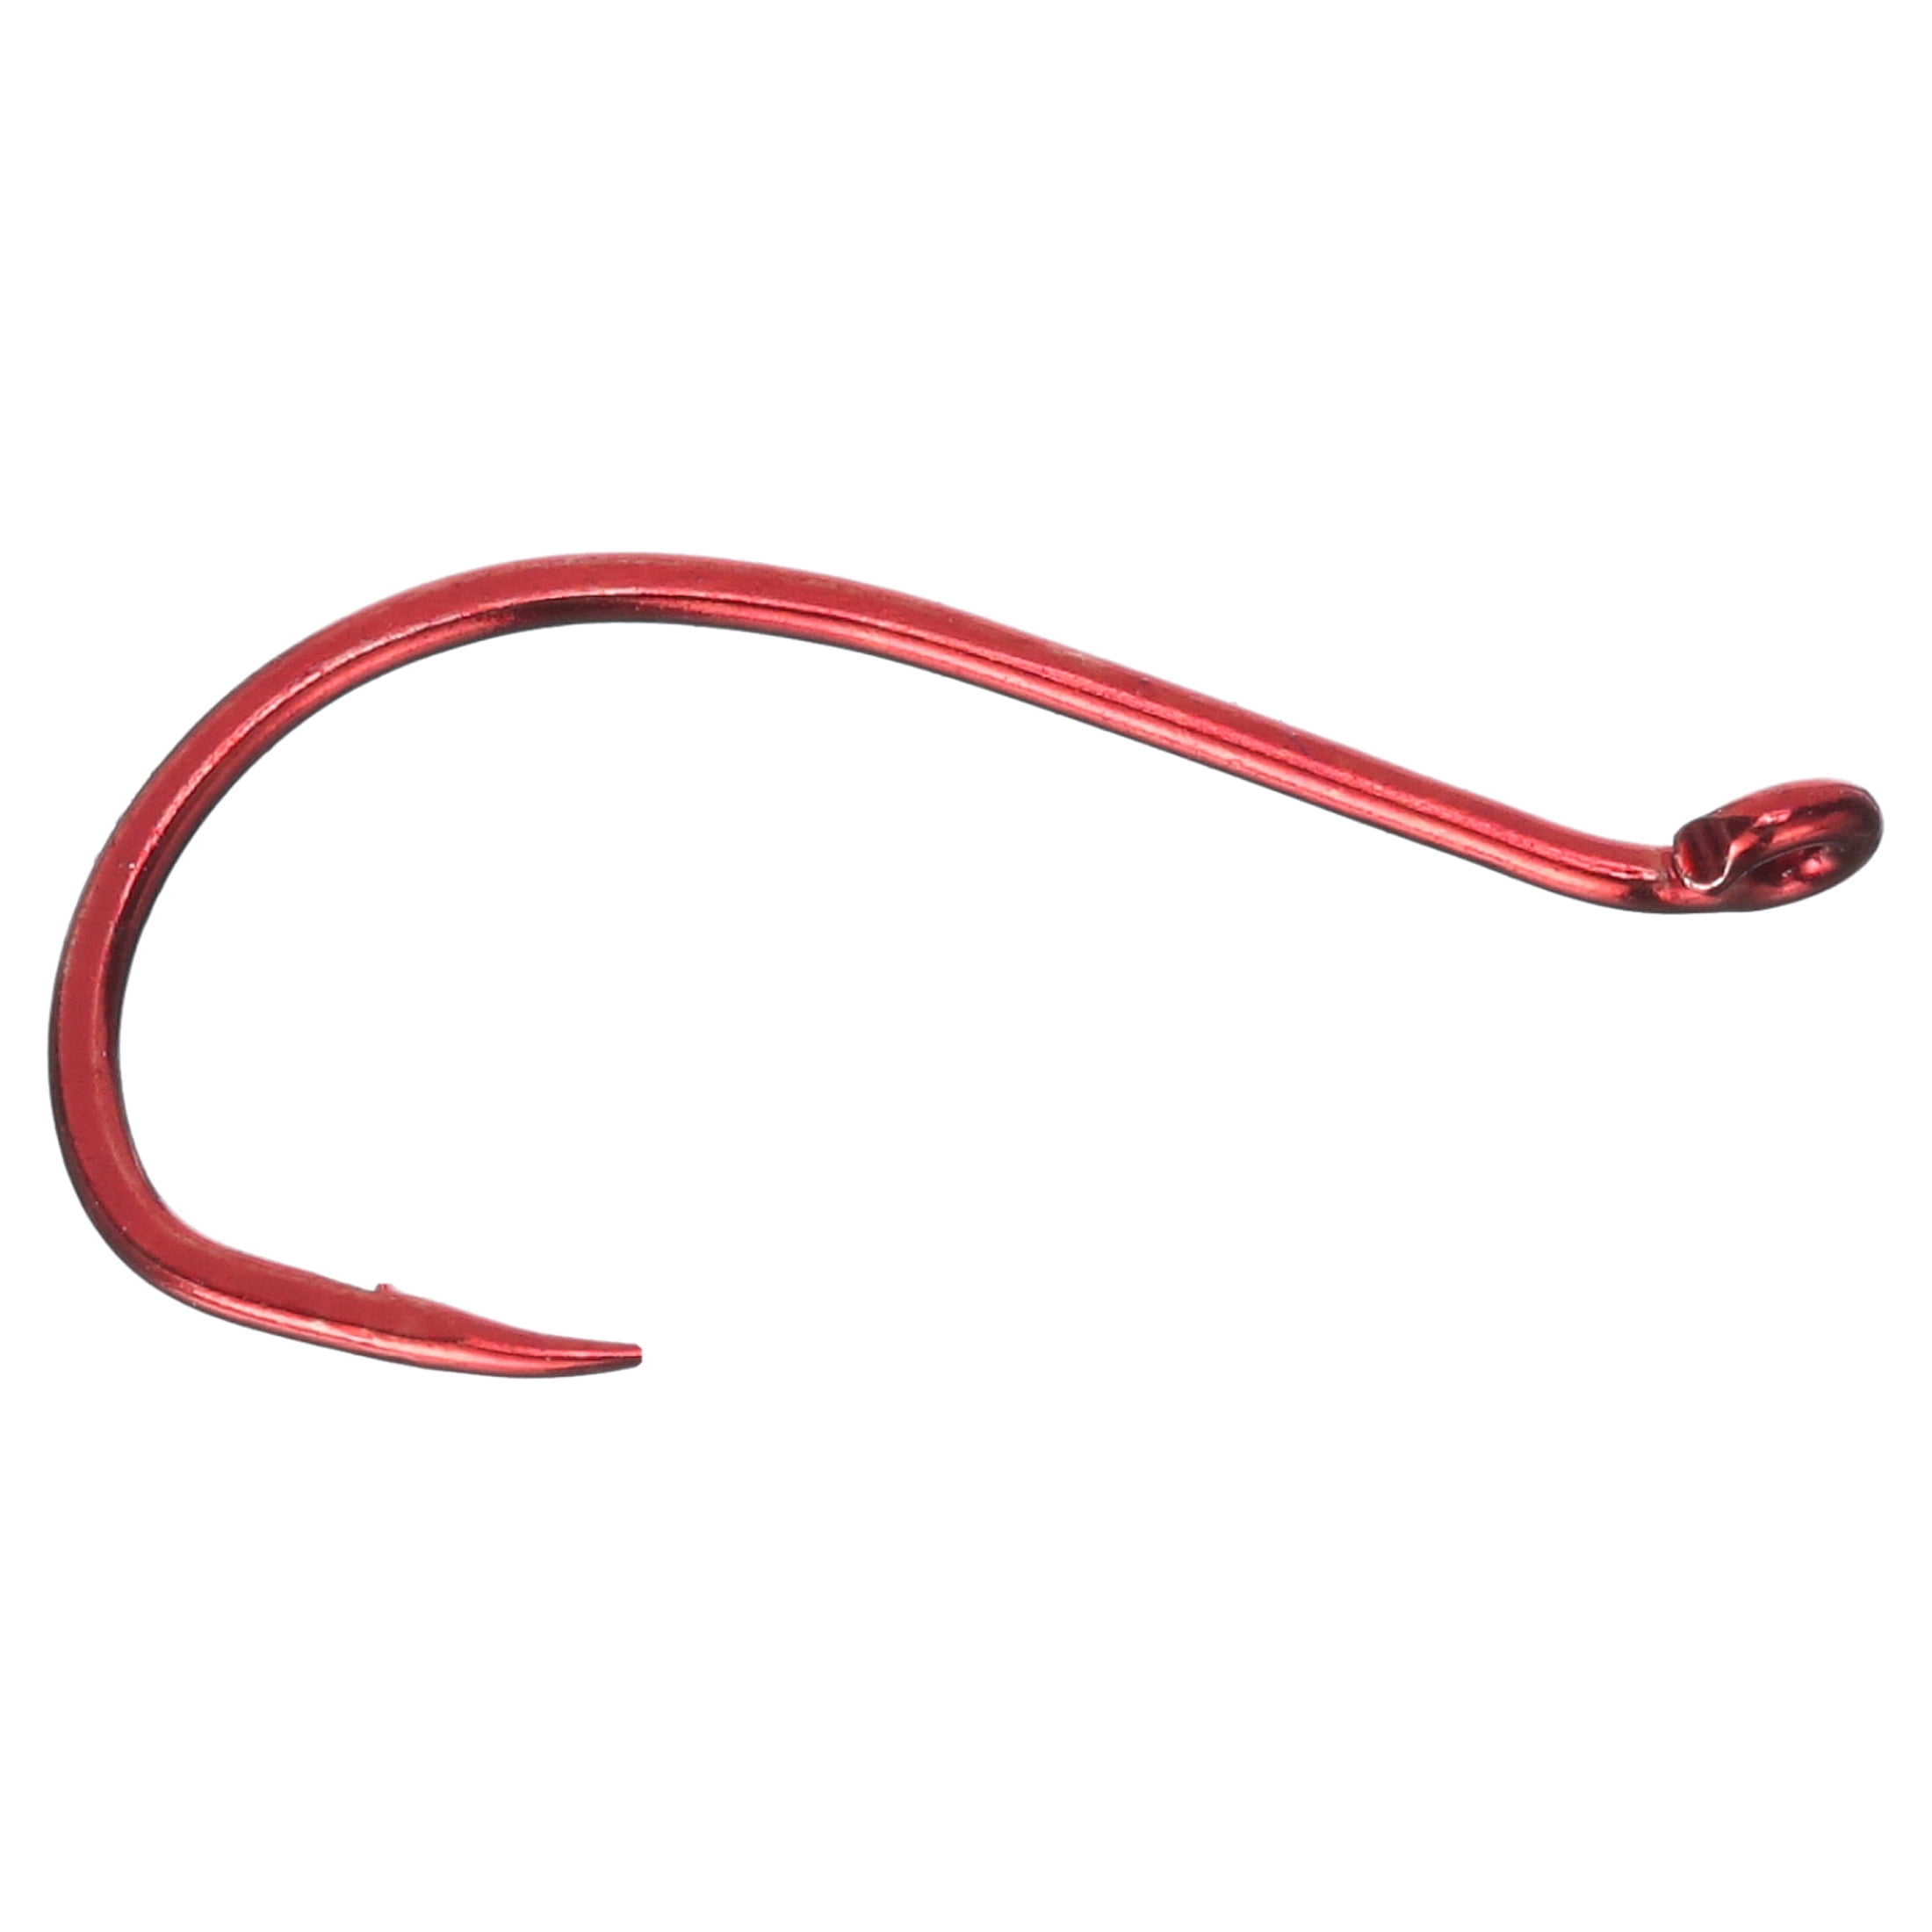 Gamakatsu Octopus Hook in High Quality Carbon Steel, Red, Size 2, 8-Pack 